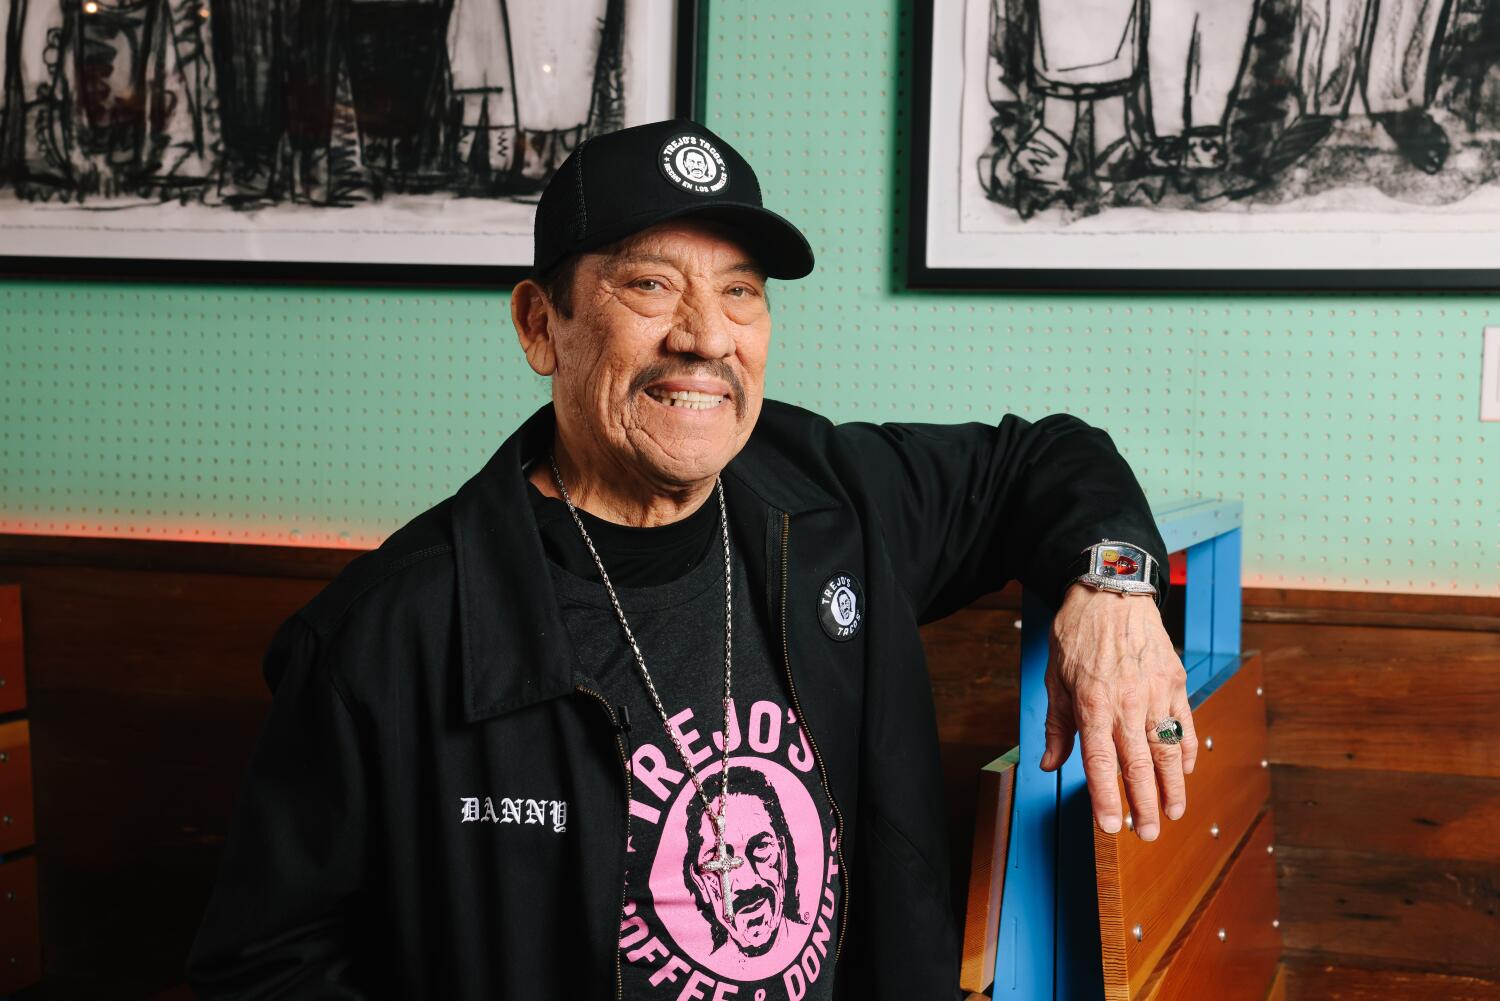 Danny Trejo says race was a factor in Fourth of July brawl launched by a water balloon